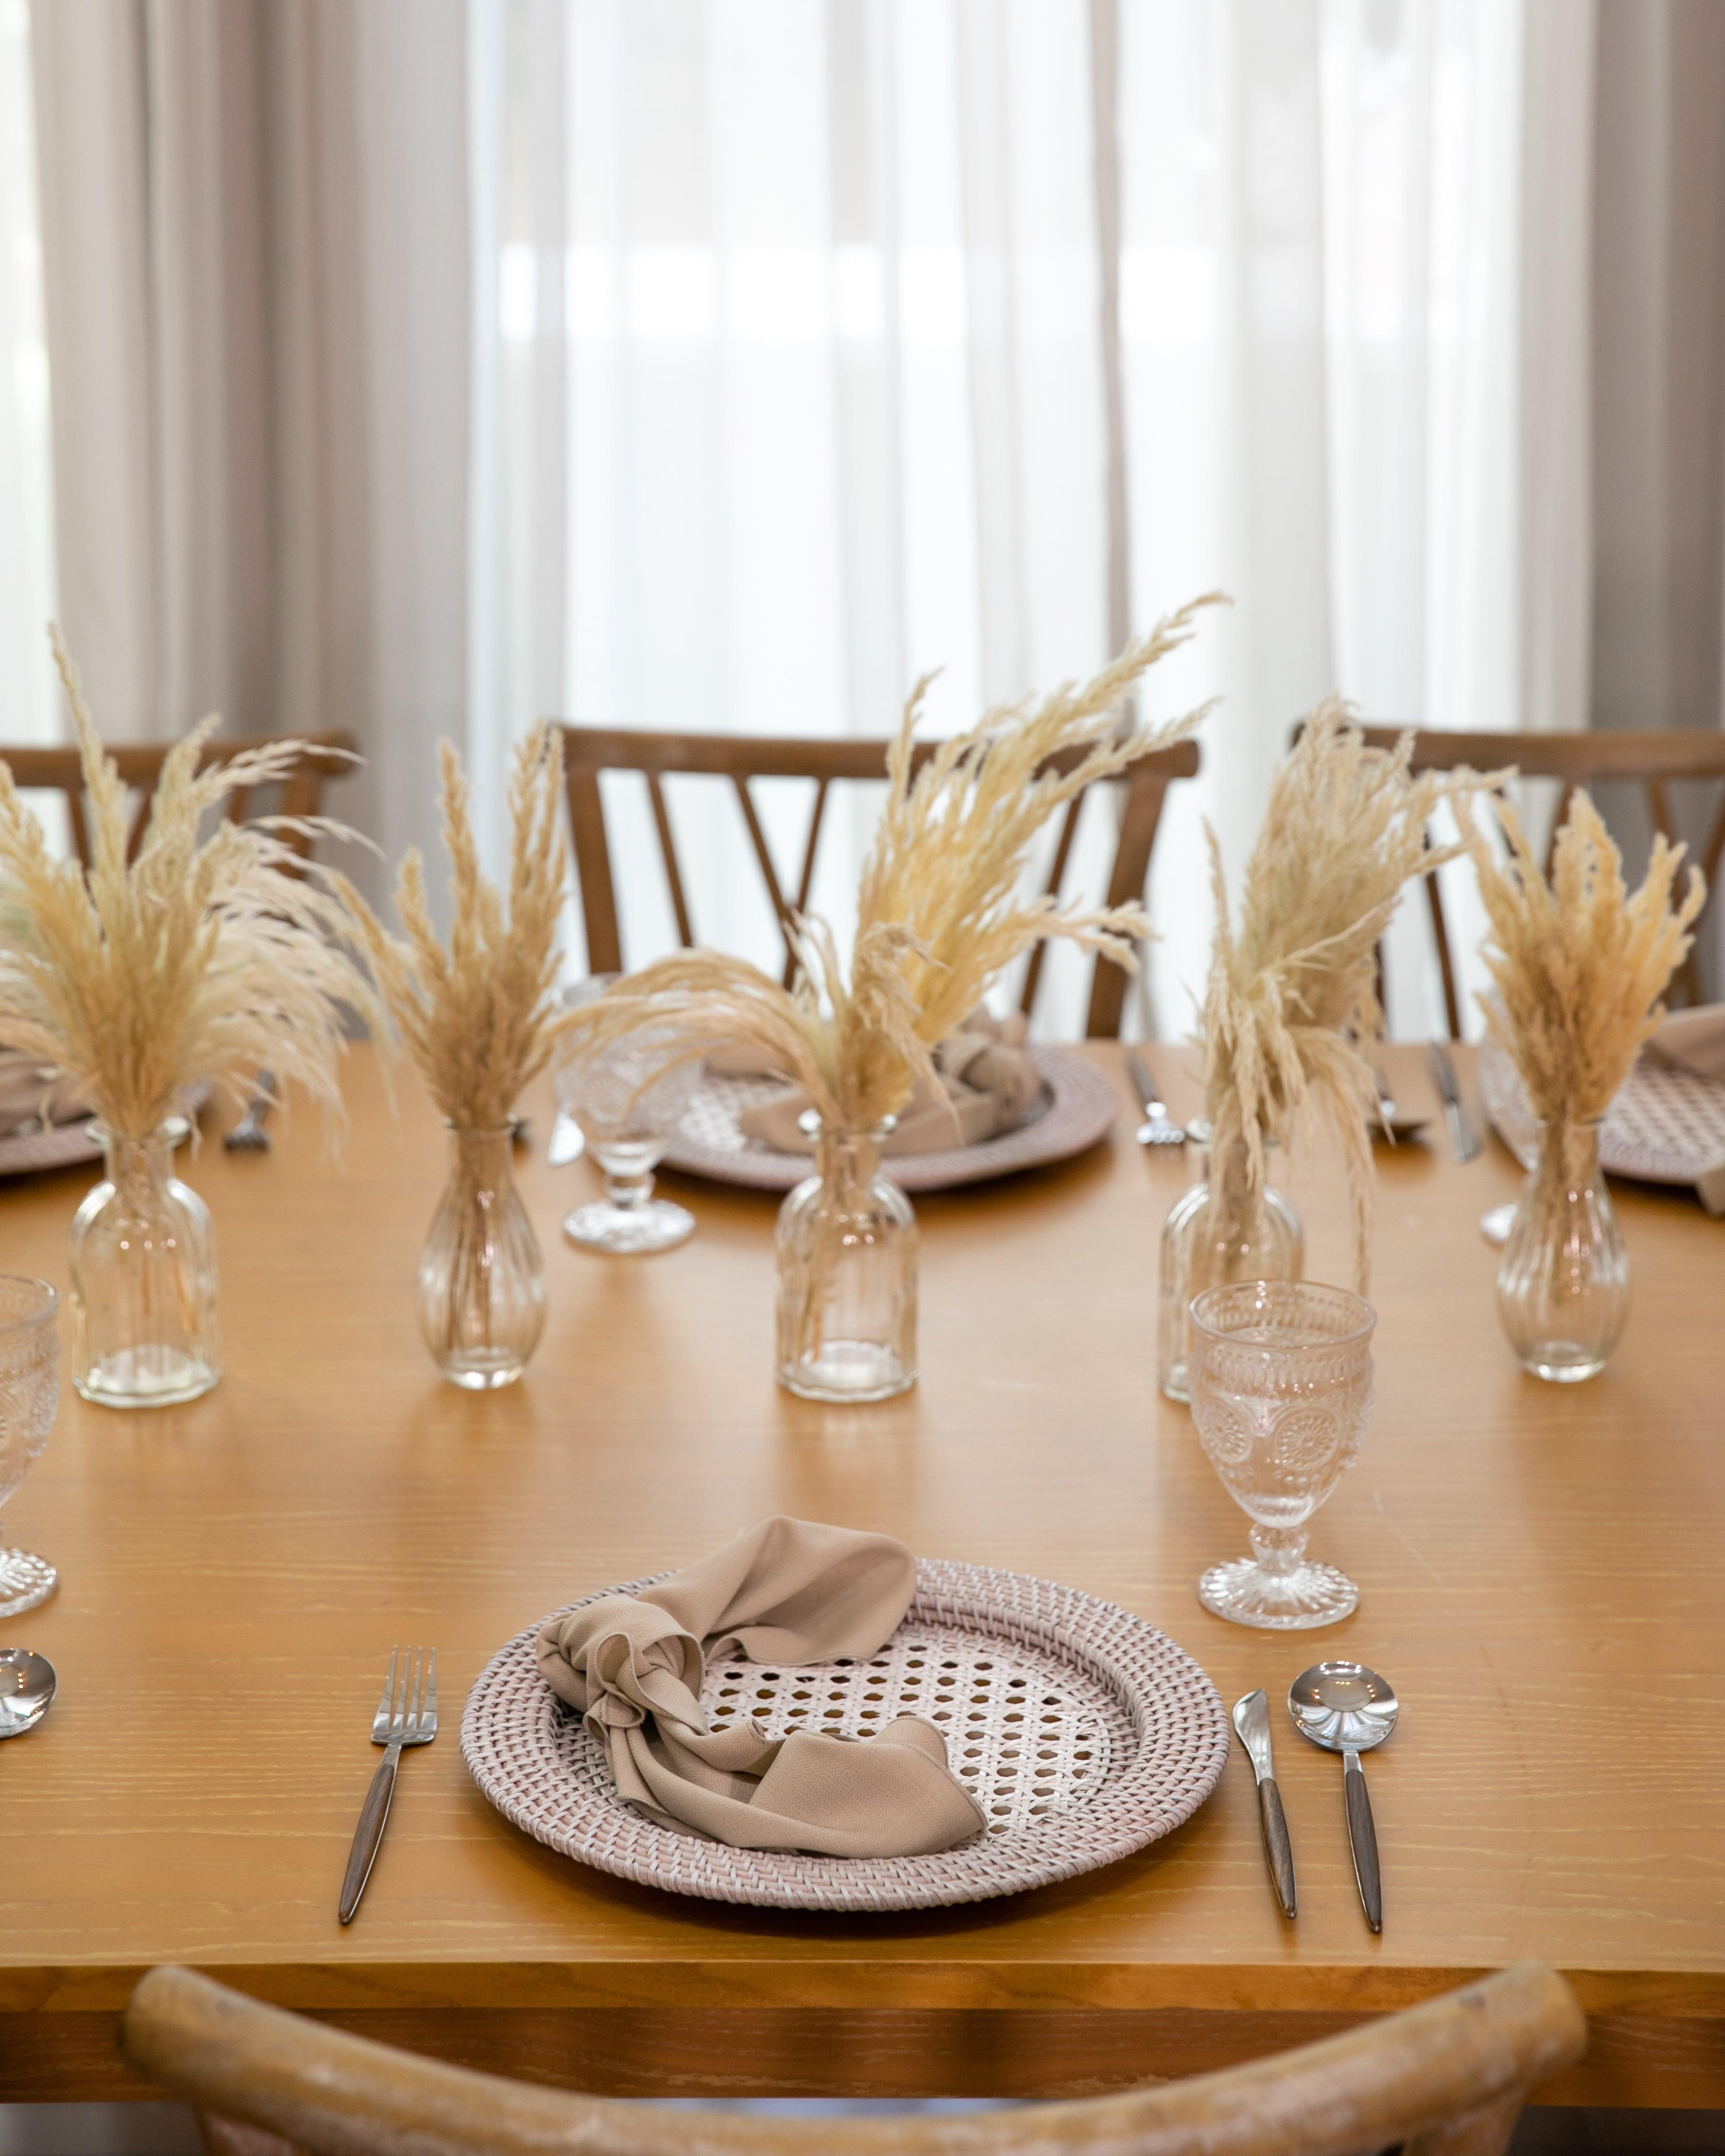 Boho &amp; Woods party package: Table with tableware, centrepieces, and glasses/vases of wheat.